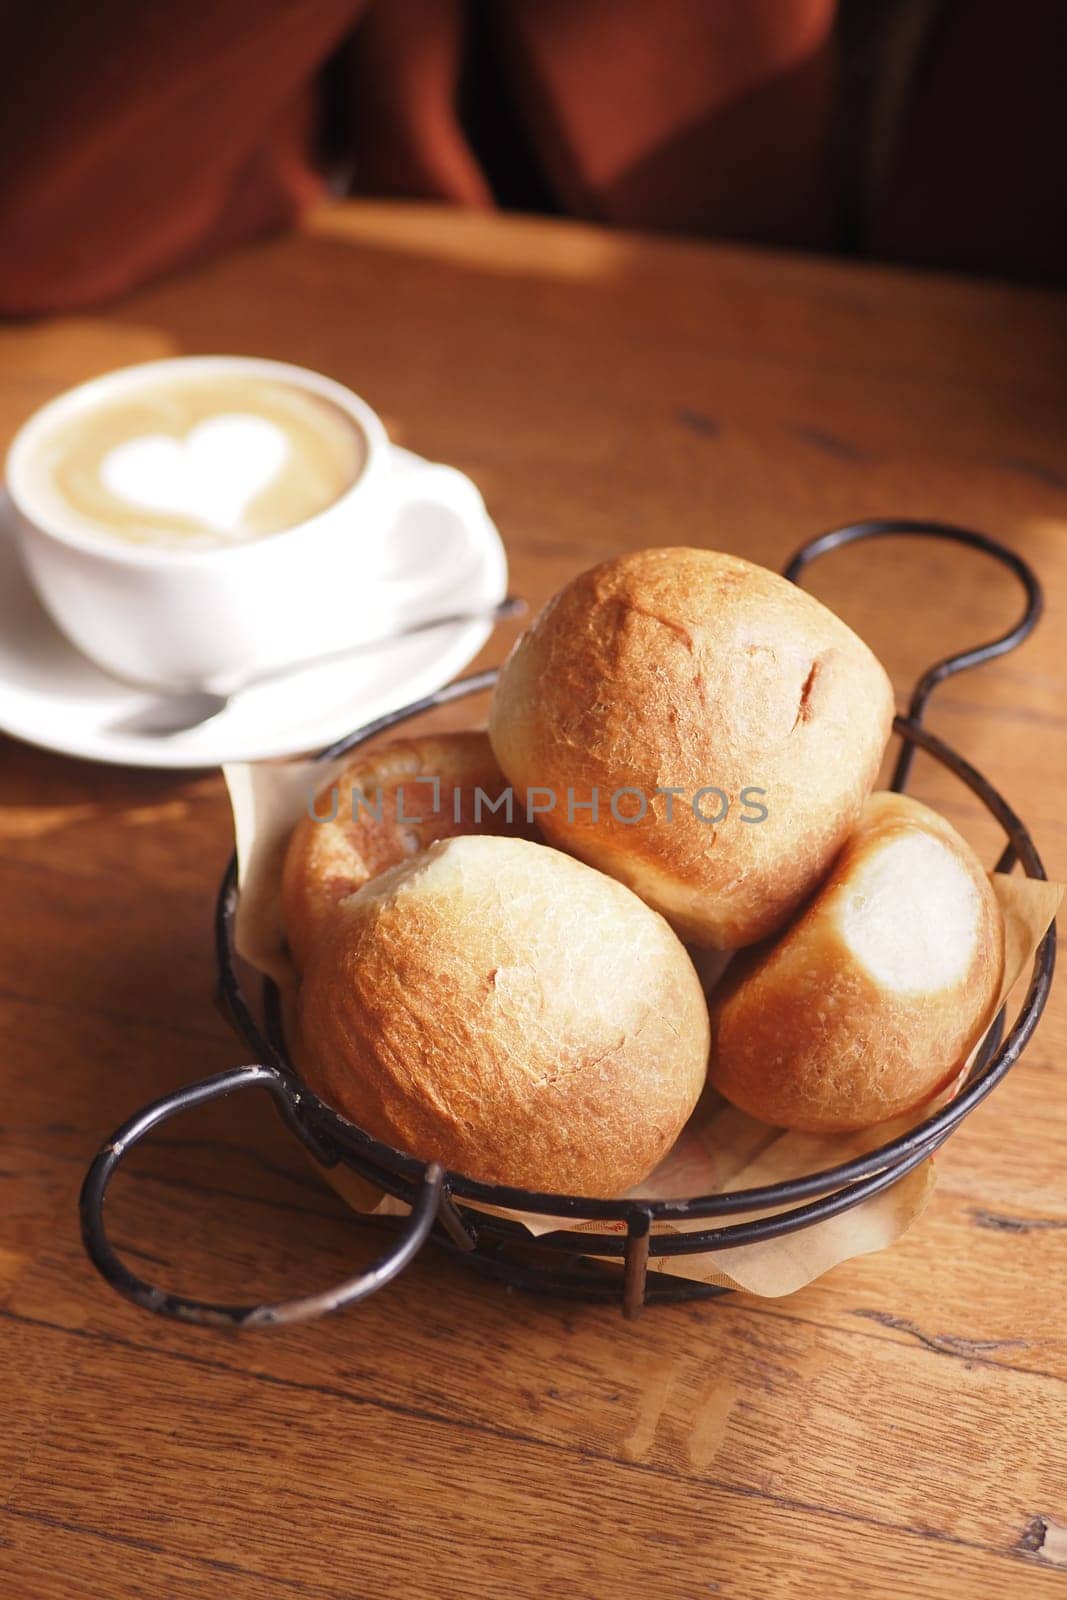 Three bread rolls rest in a black bowl on the table by towfiq007